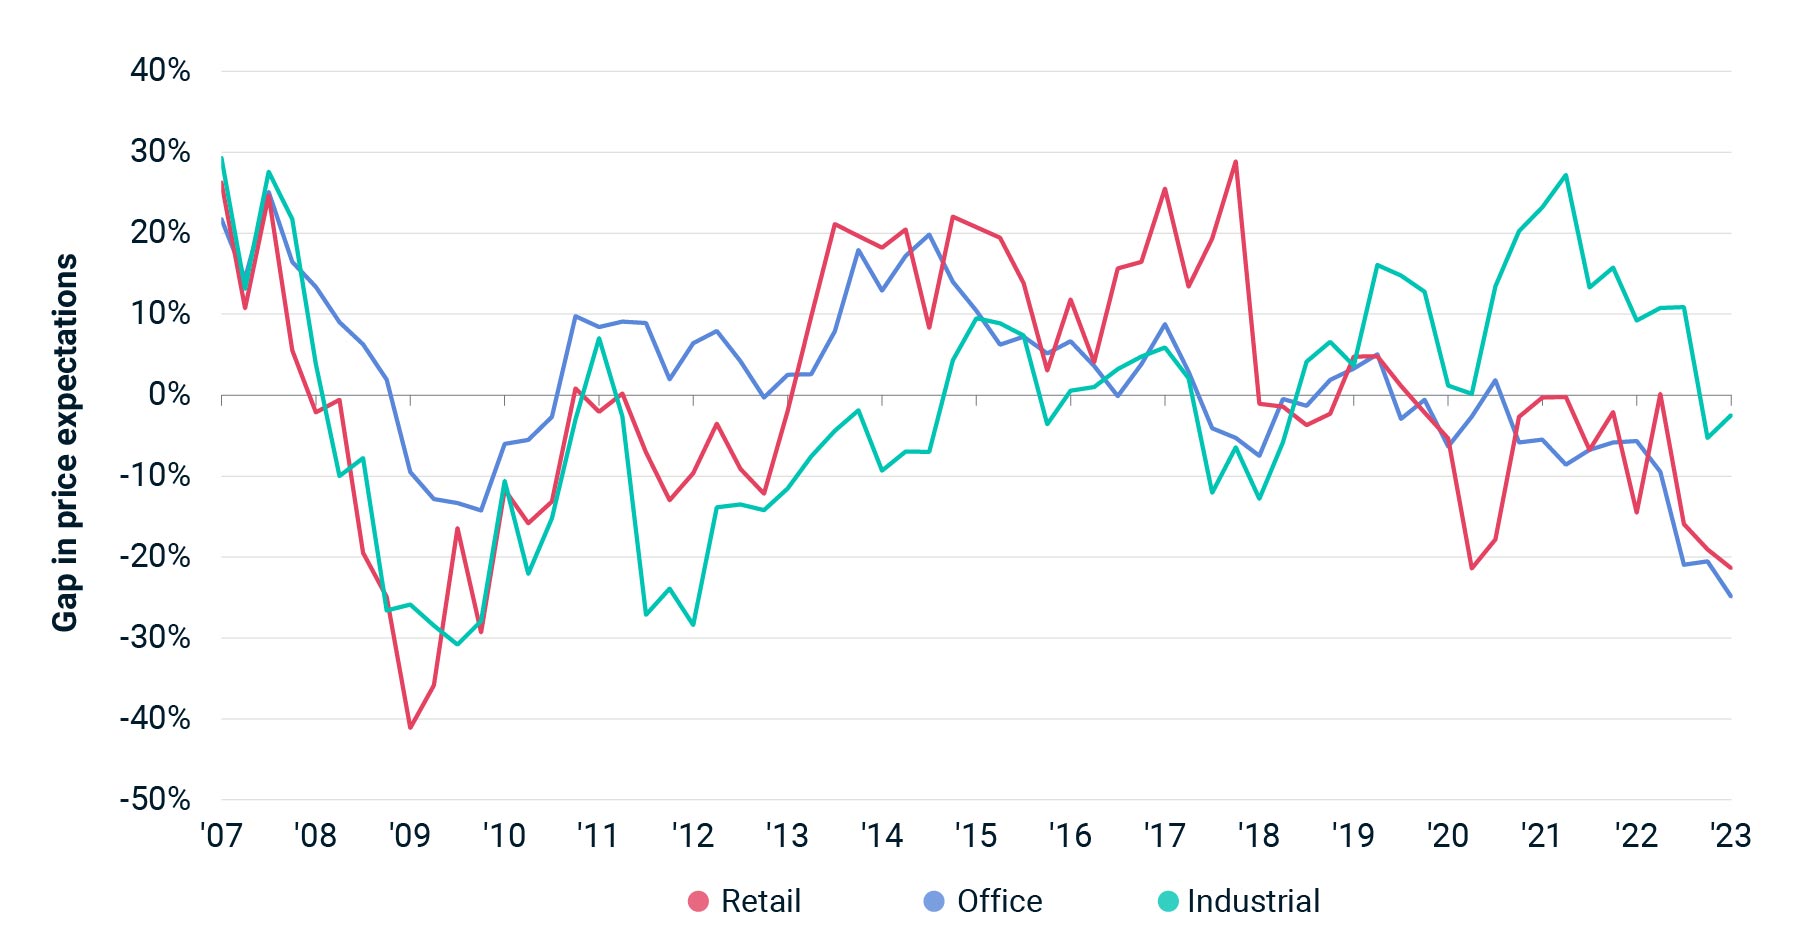 This line graph shows the difference in buyer and seller expectations for Swedish office, retail and industrial prices back to 2007.